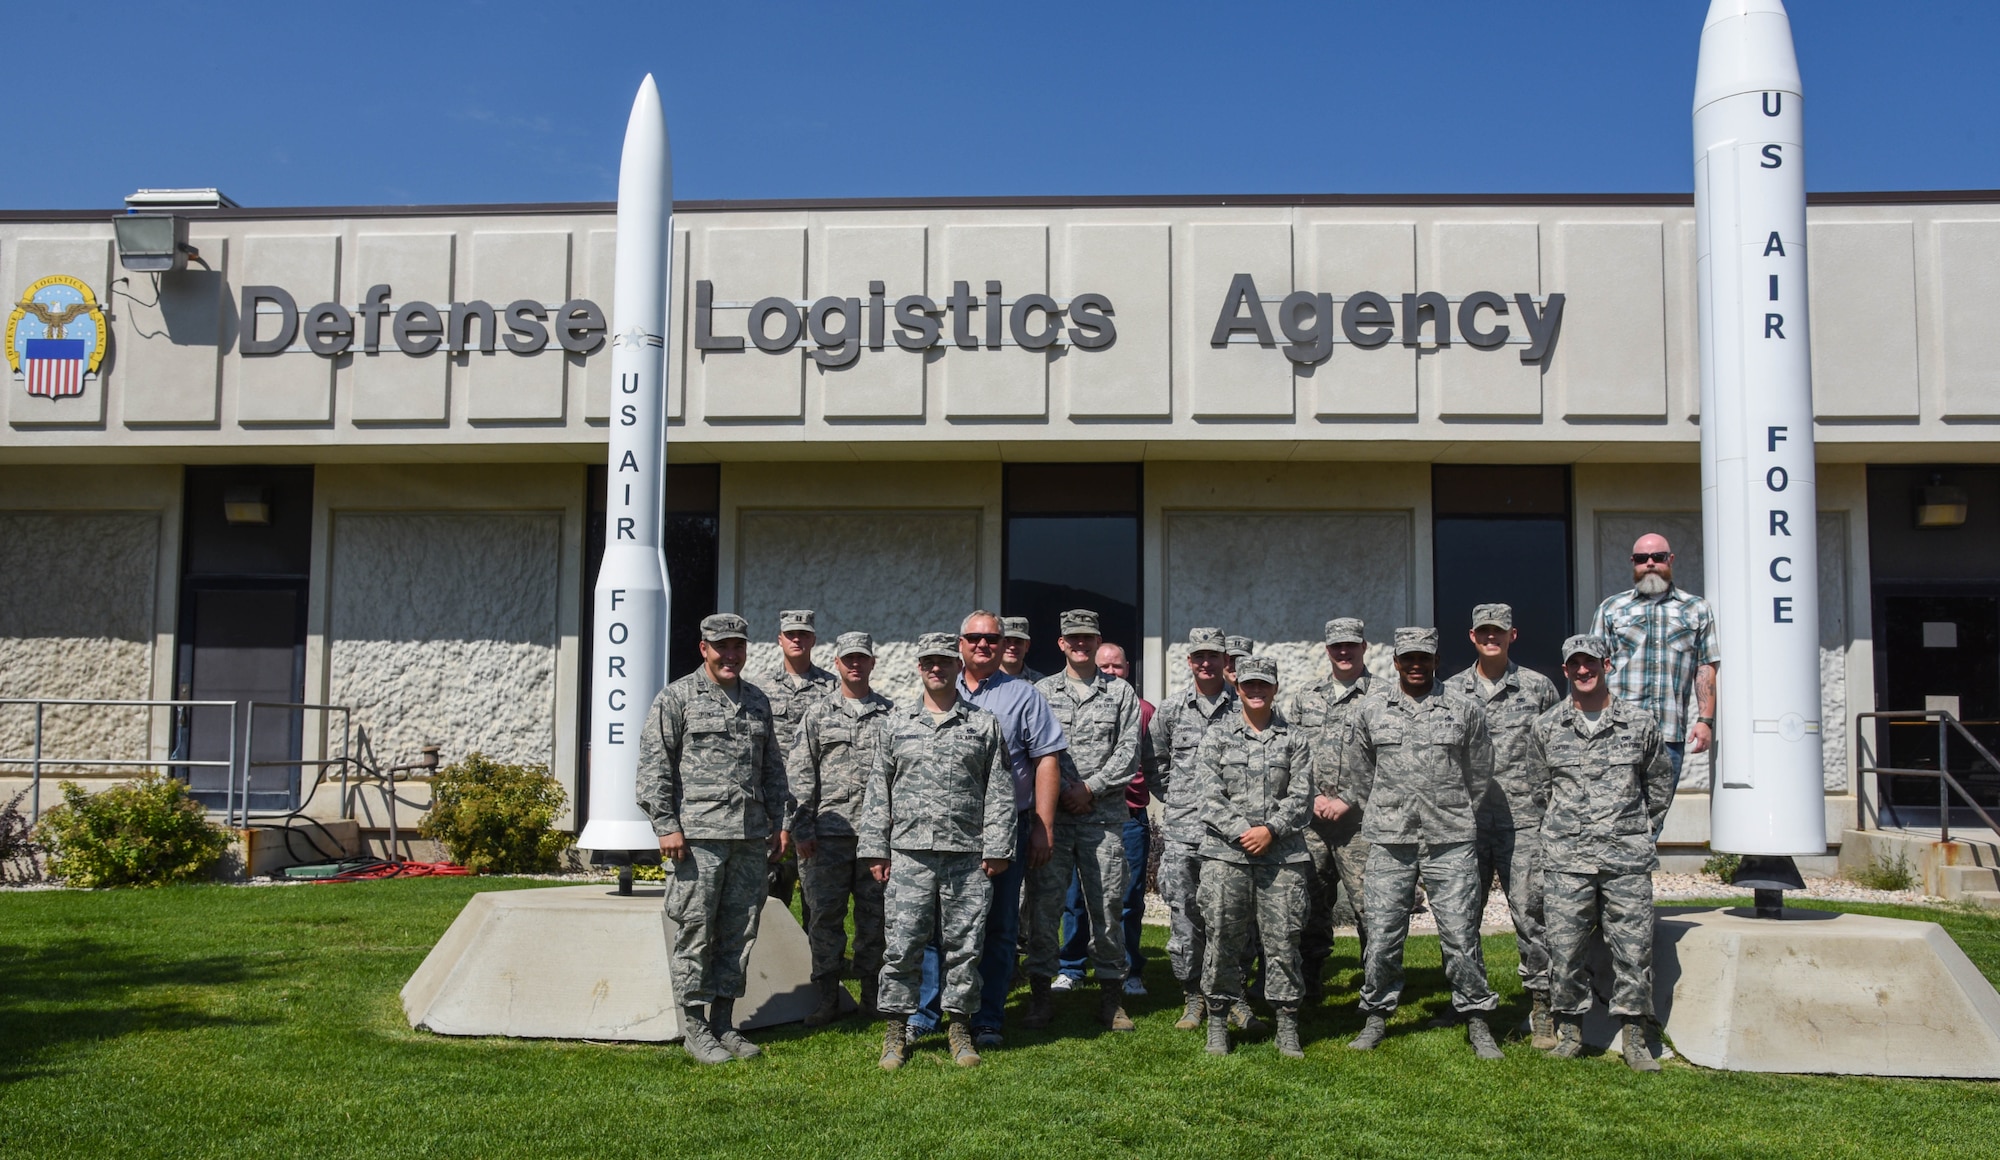 F.E. Warren and Hill Air Force Base’s Logistics Officer Association members pose for a photo in front of the Defense Logistics Agency at Hill Air Force Base, Utah, Aug. 10, 2017.